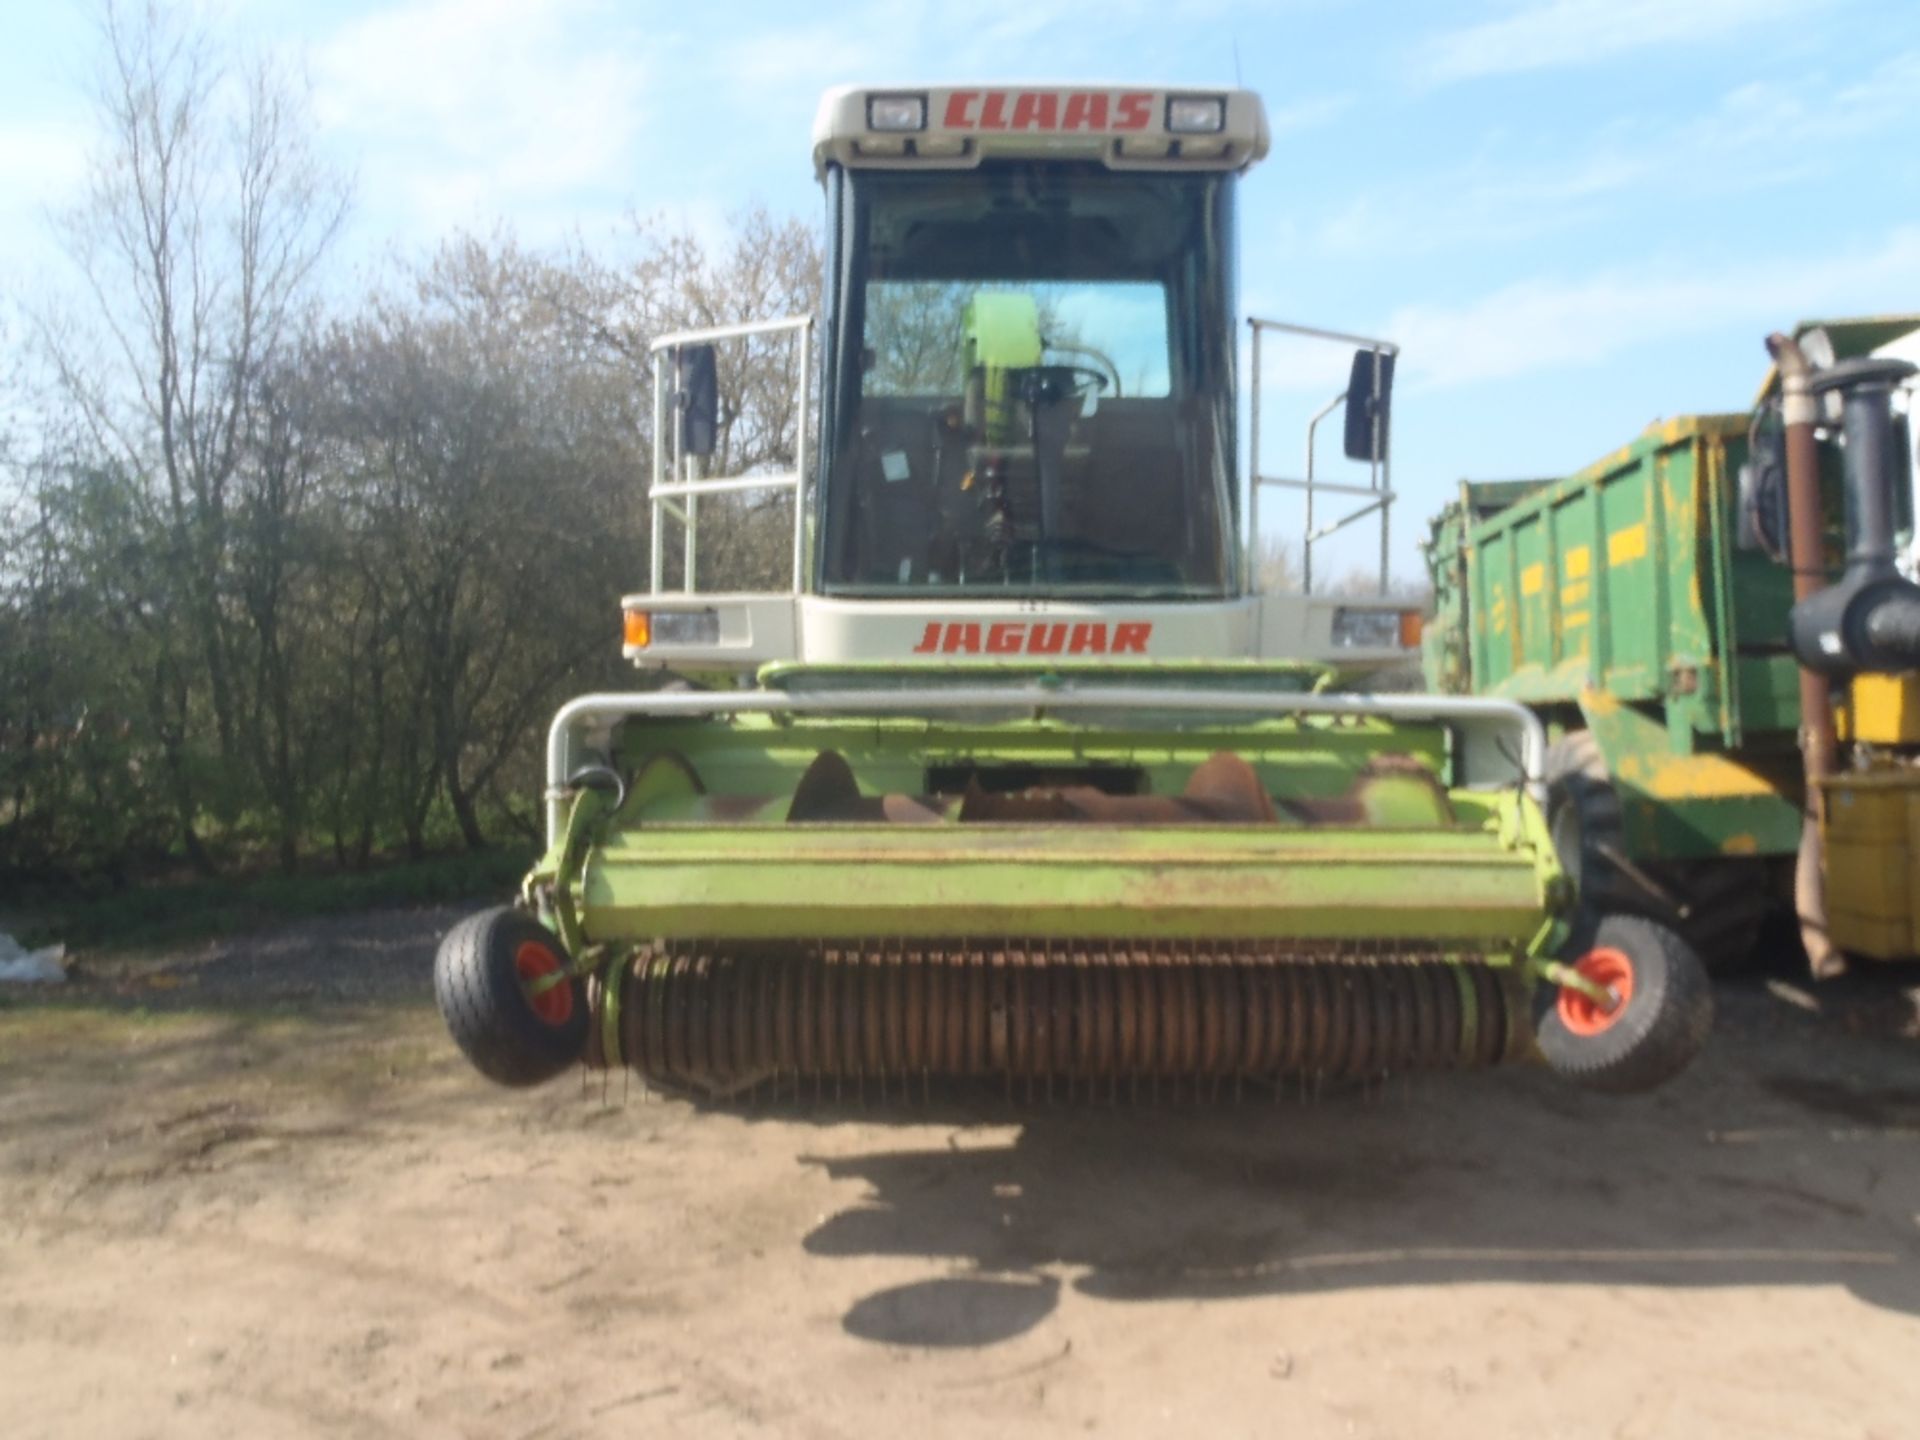 Claas Jaguar 840 Forage Harvester with 3m Grass Pick Up. Reg.No. T336 UOS - Image 5 of 7